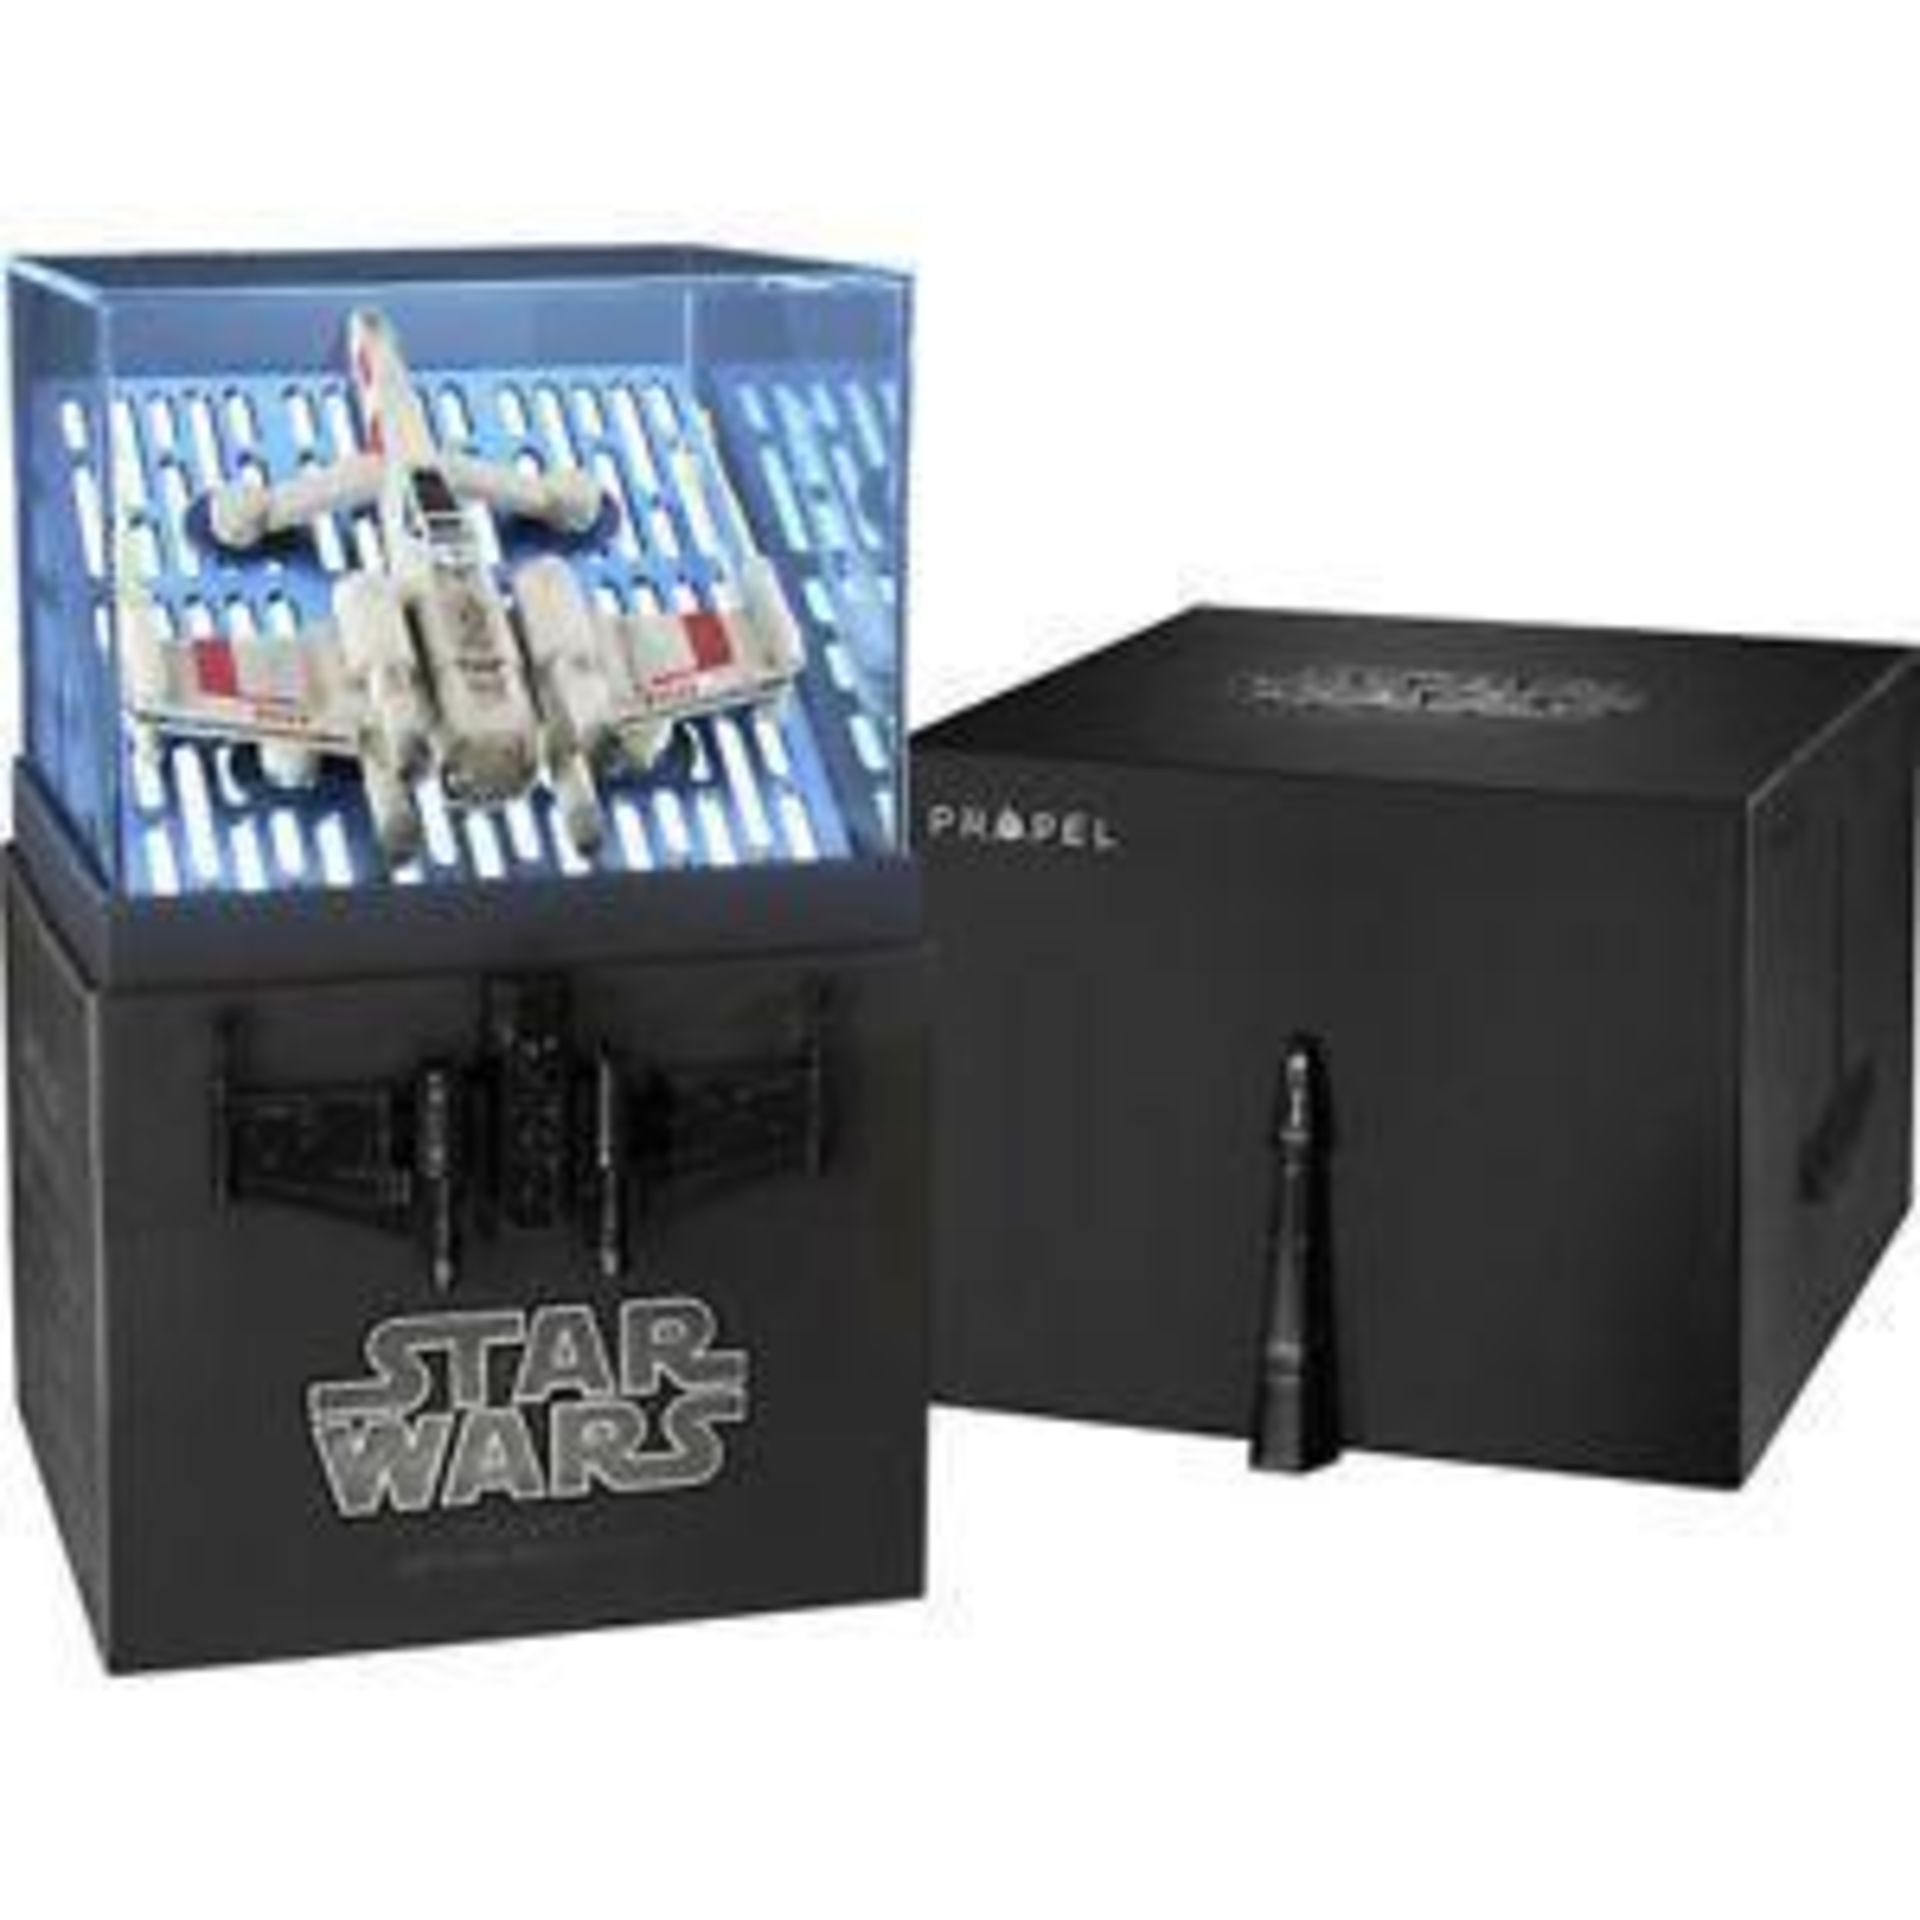 NEW STAR WARS PROPEL T-65 X-Wing Starfighter Battle Quadcopter Drone (Collectors Edition)